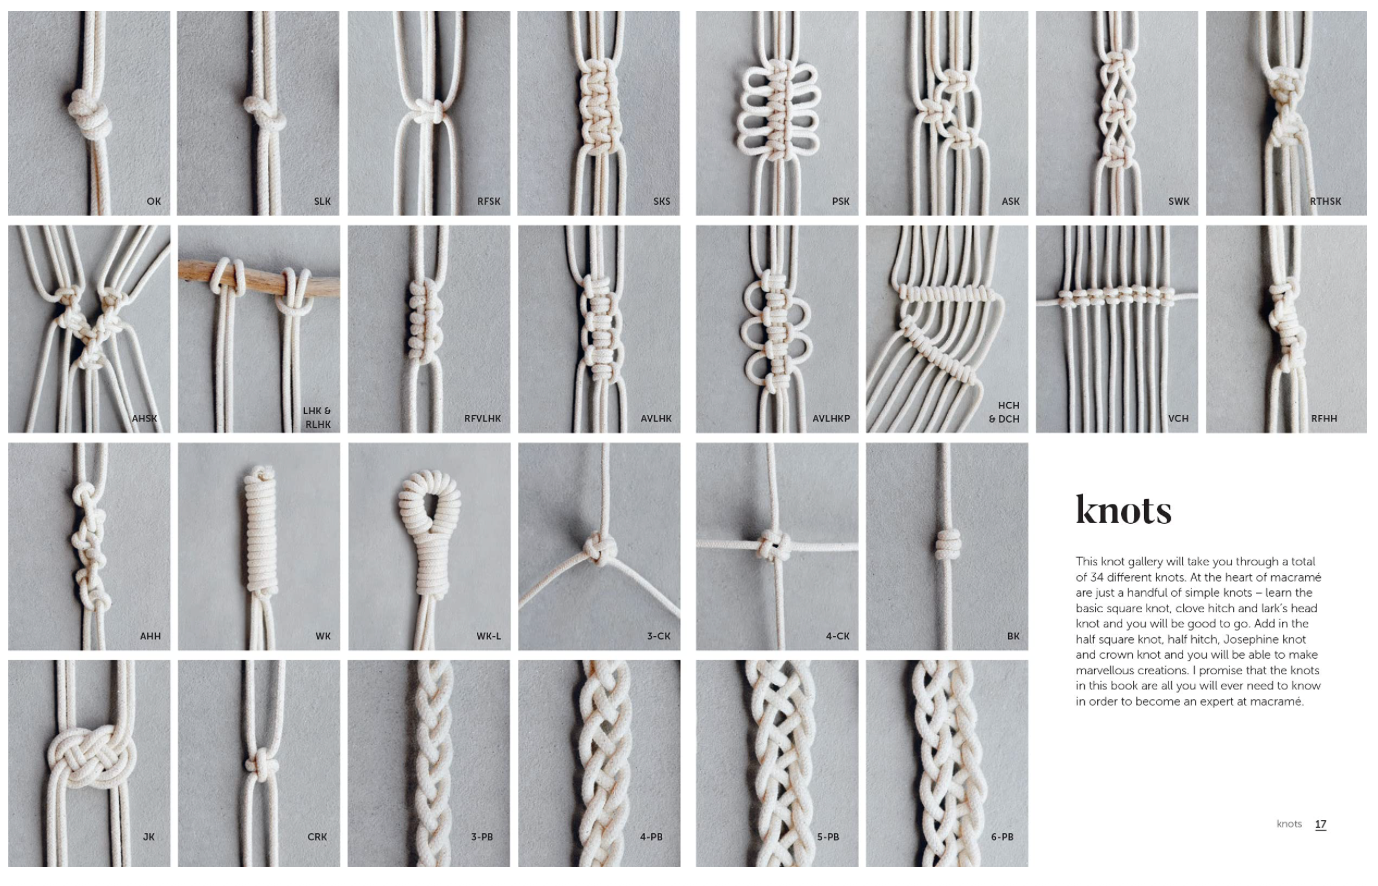 Oddly Enough Books- Macrame: The Craft of Creative Knotting for Your Home by Fanny Zedenius